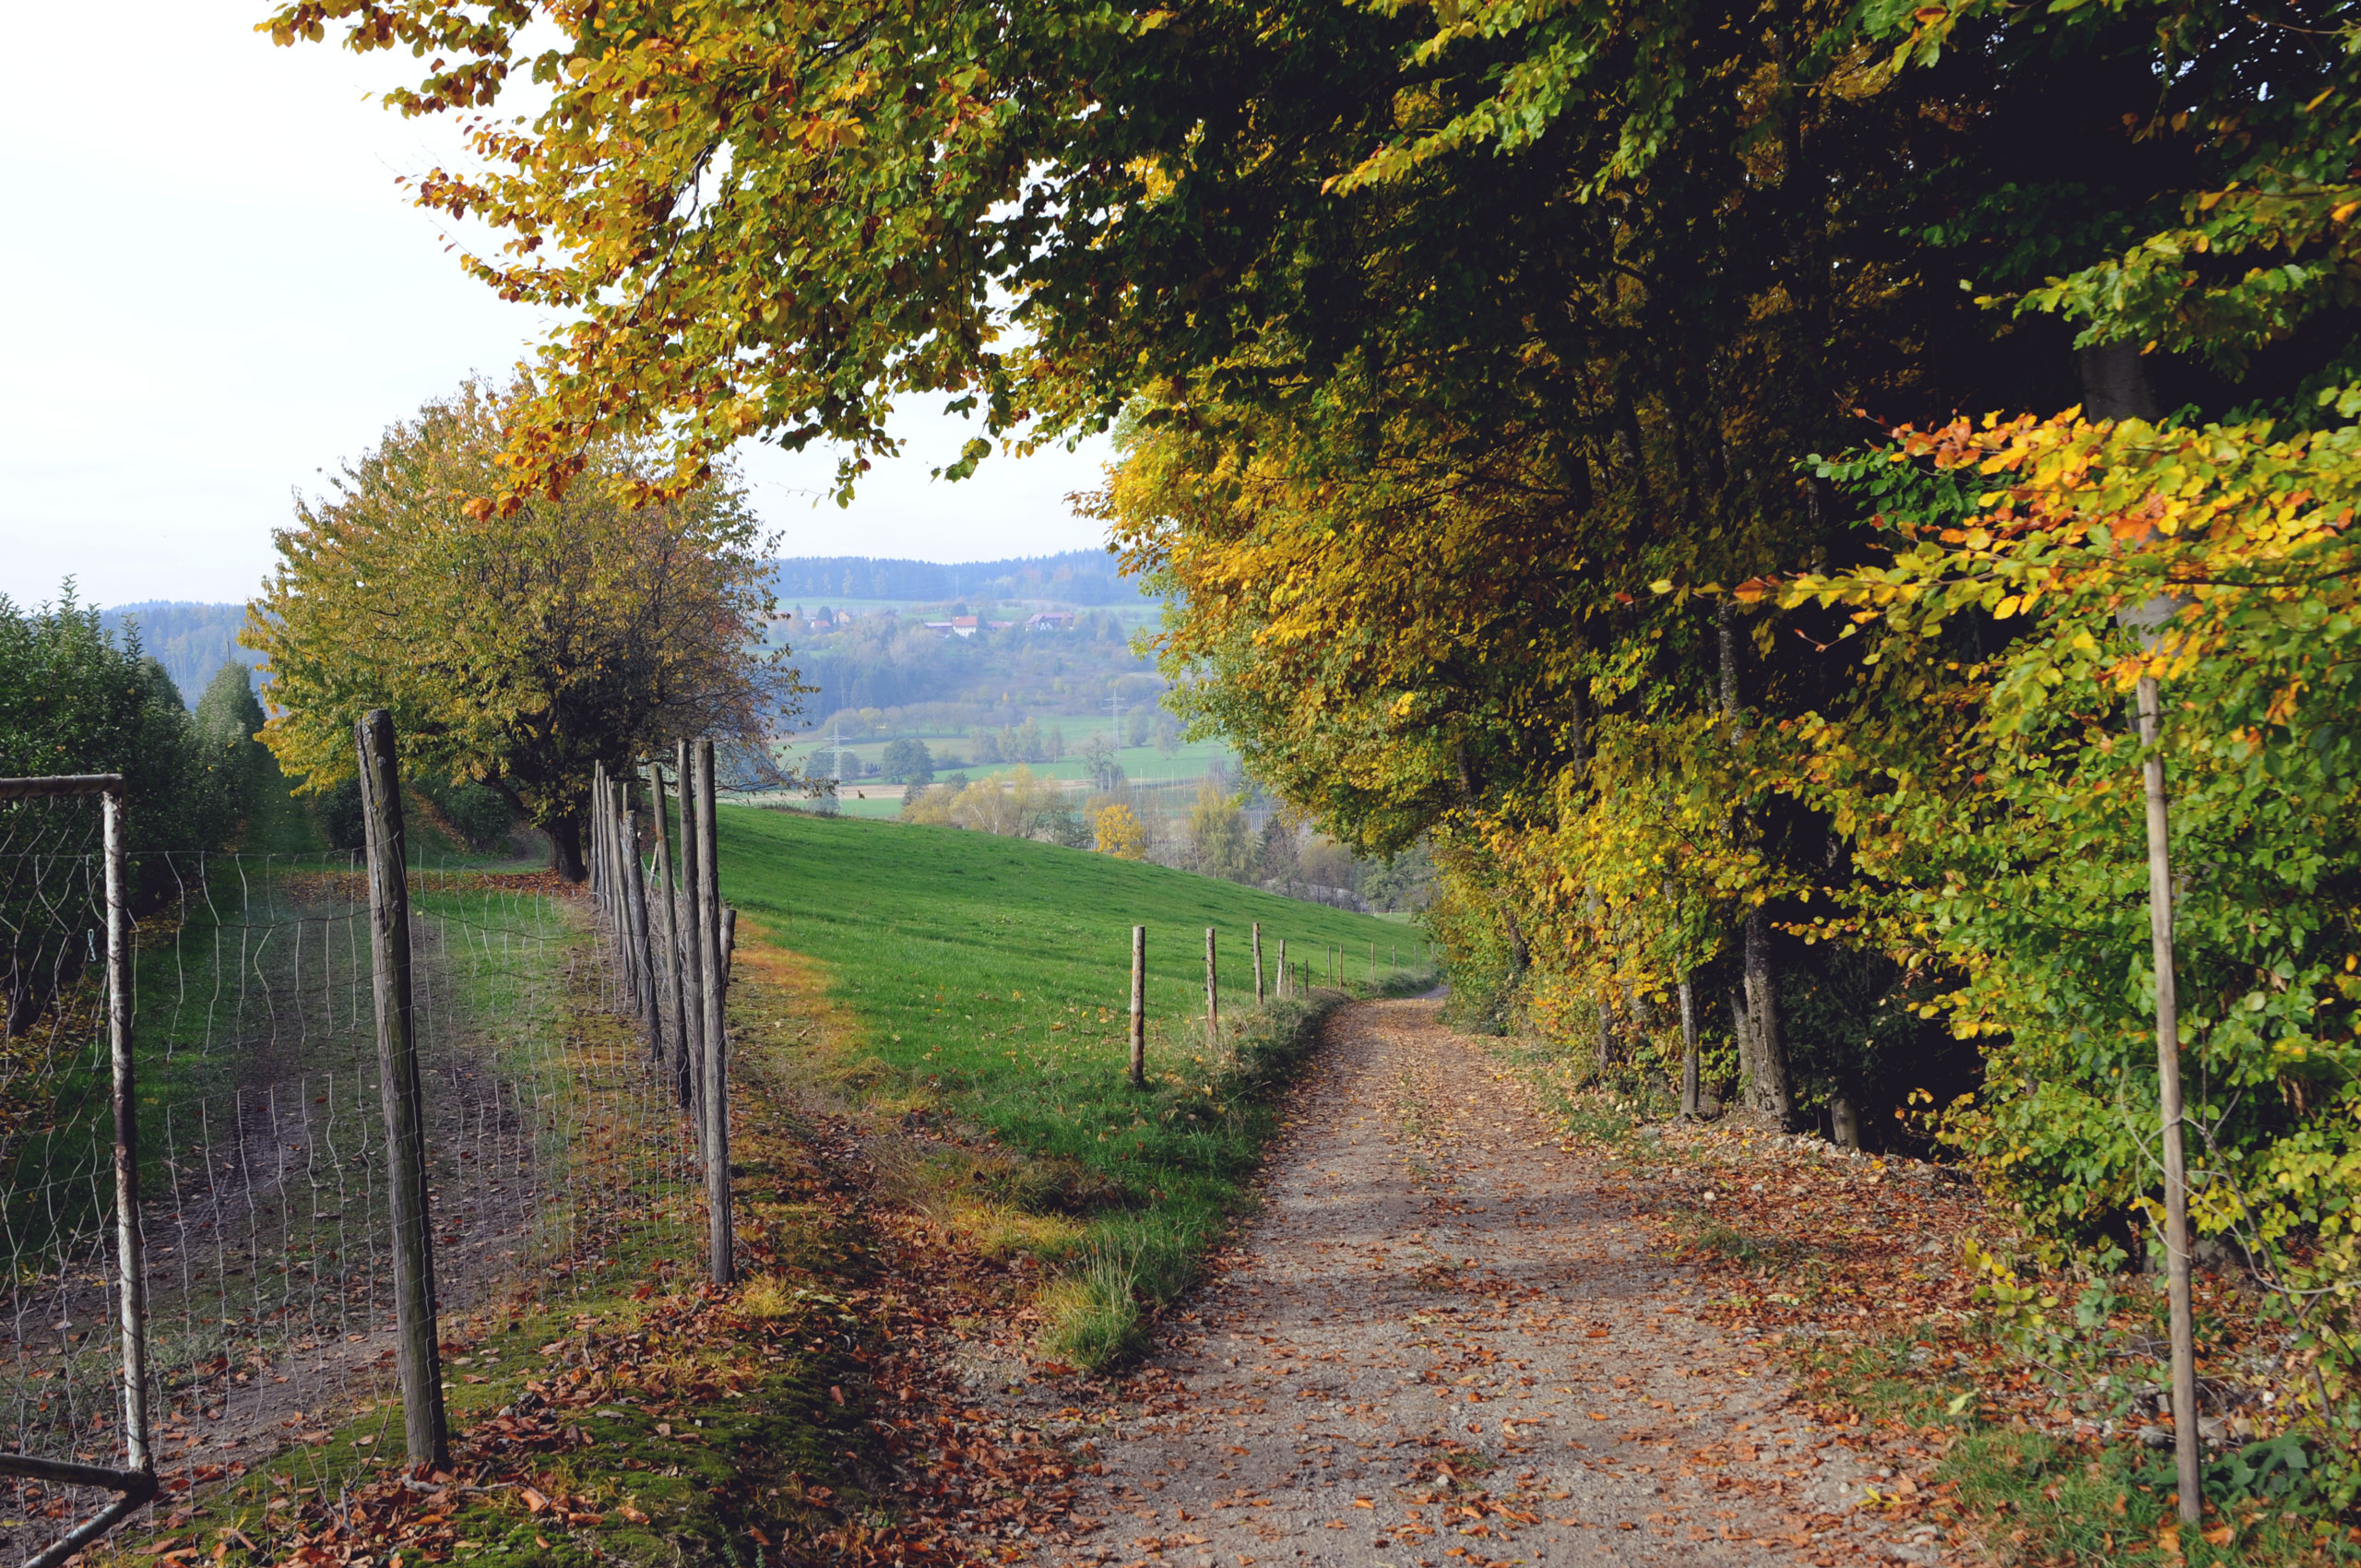 The path to our apple plantation